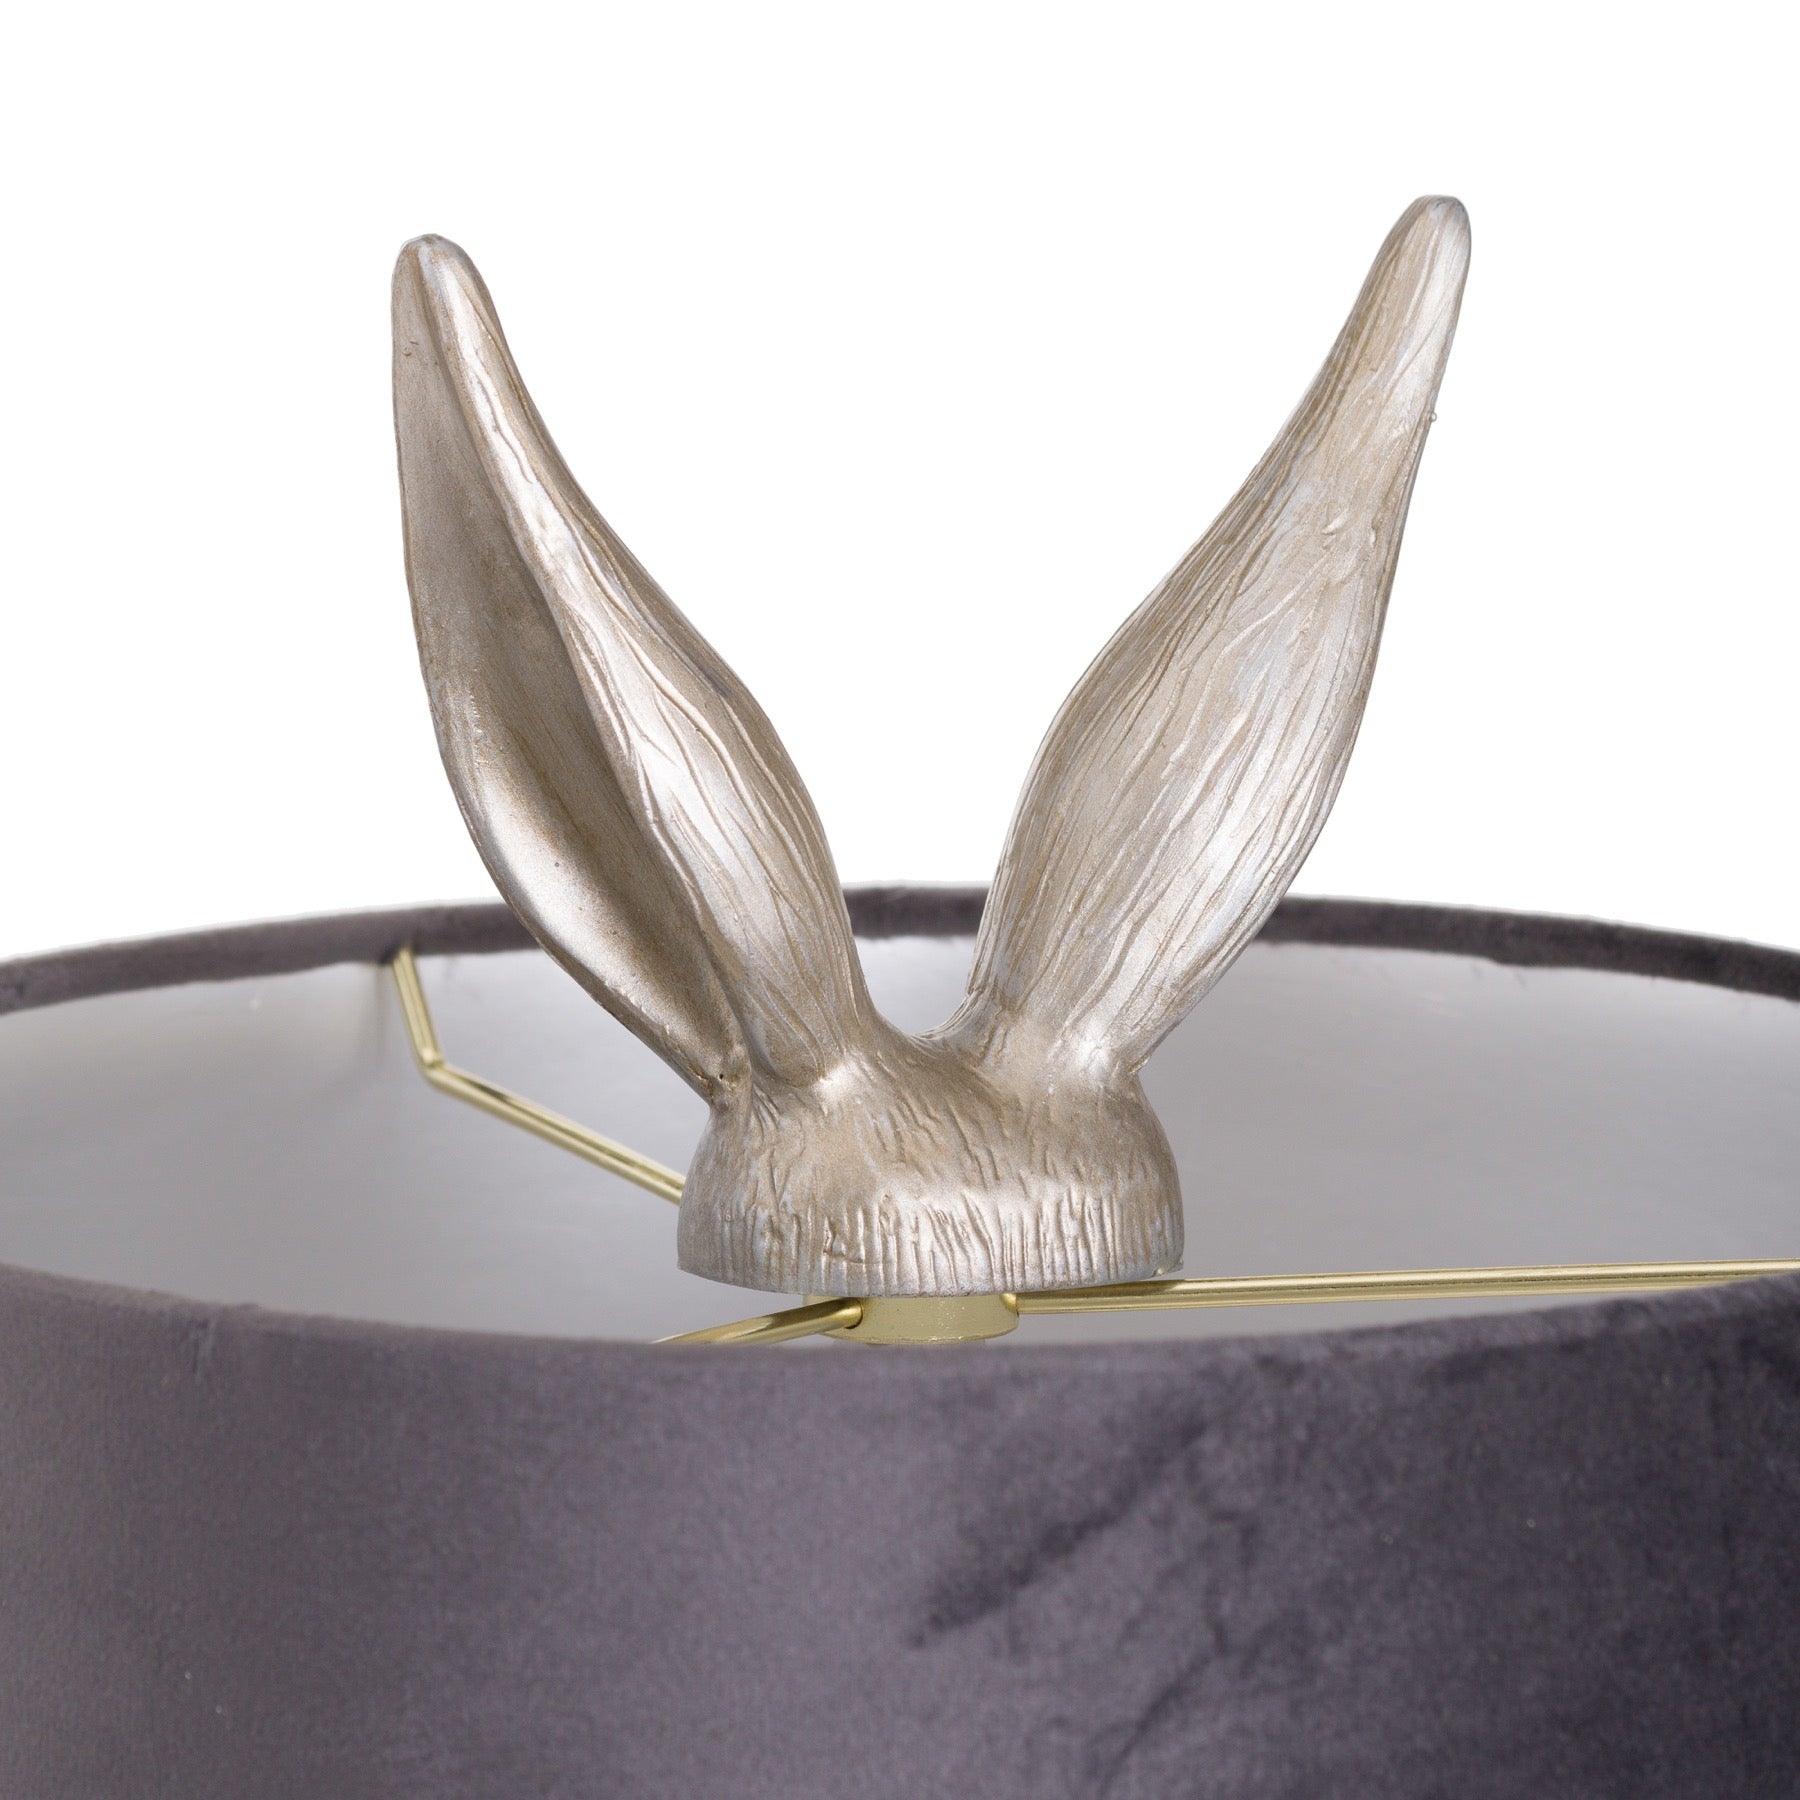 Silver Hare Table Lamp With Grey Velvet Shade - Vookoo Lifestyle